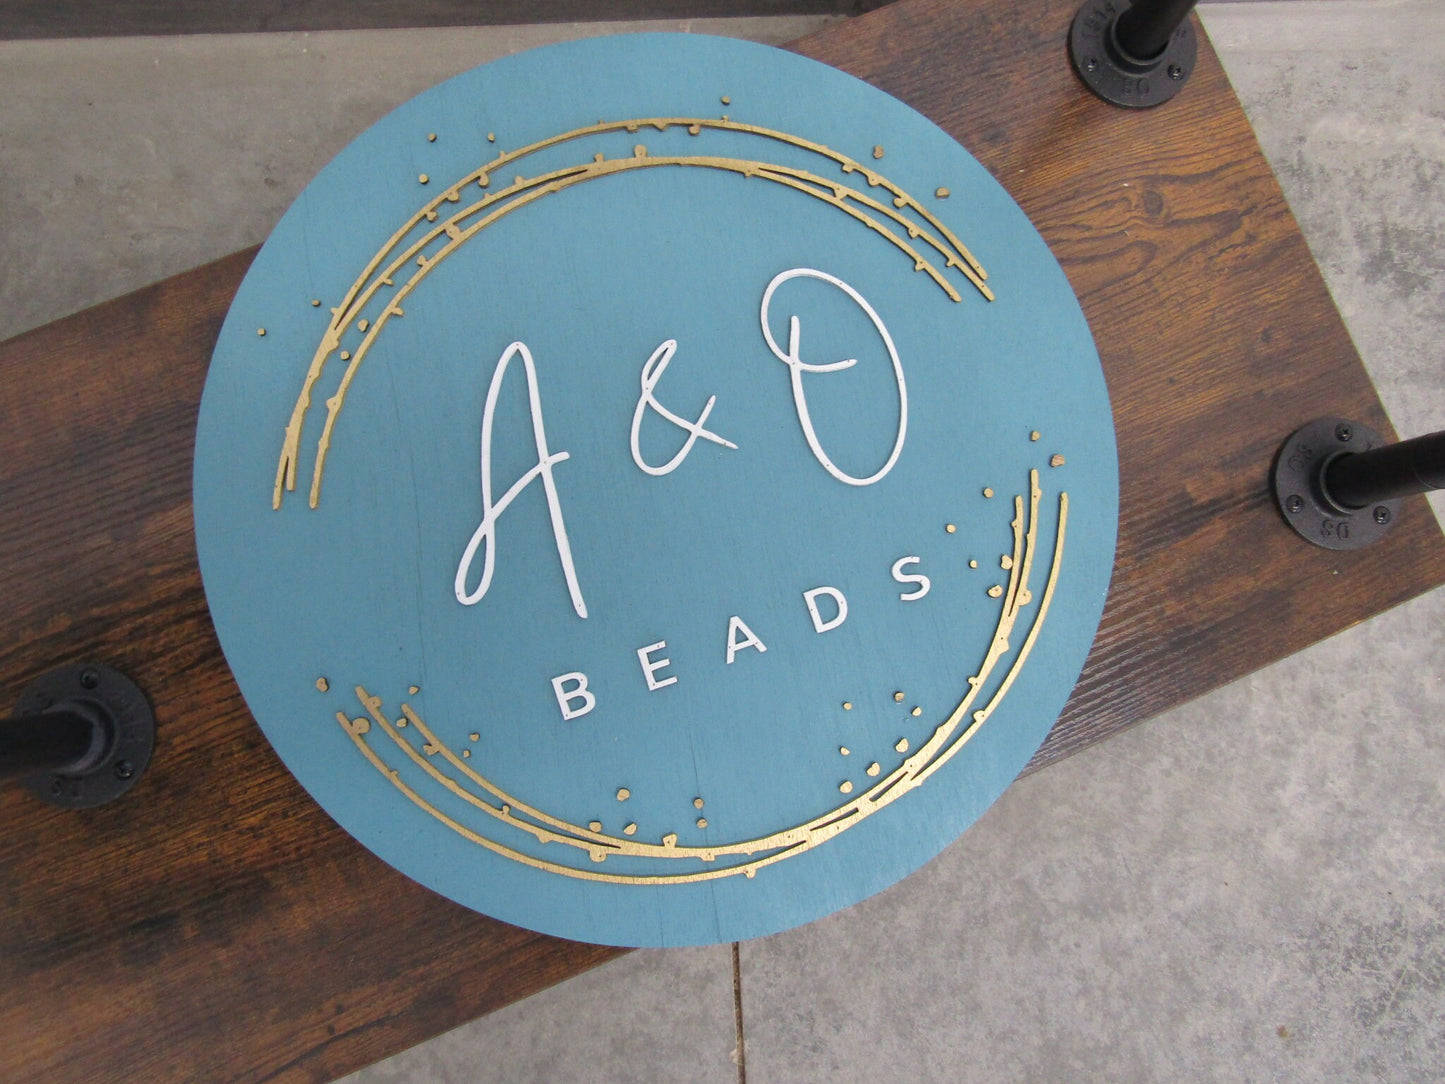 Custom Sign Round Business Commerical Signage Minimalist Made to Order Bubbles Beads Store Front Small Shop Logo Circle Wooden Handmade